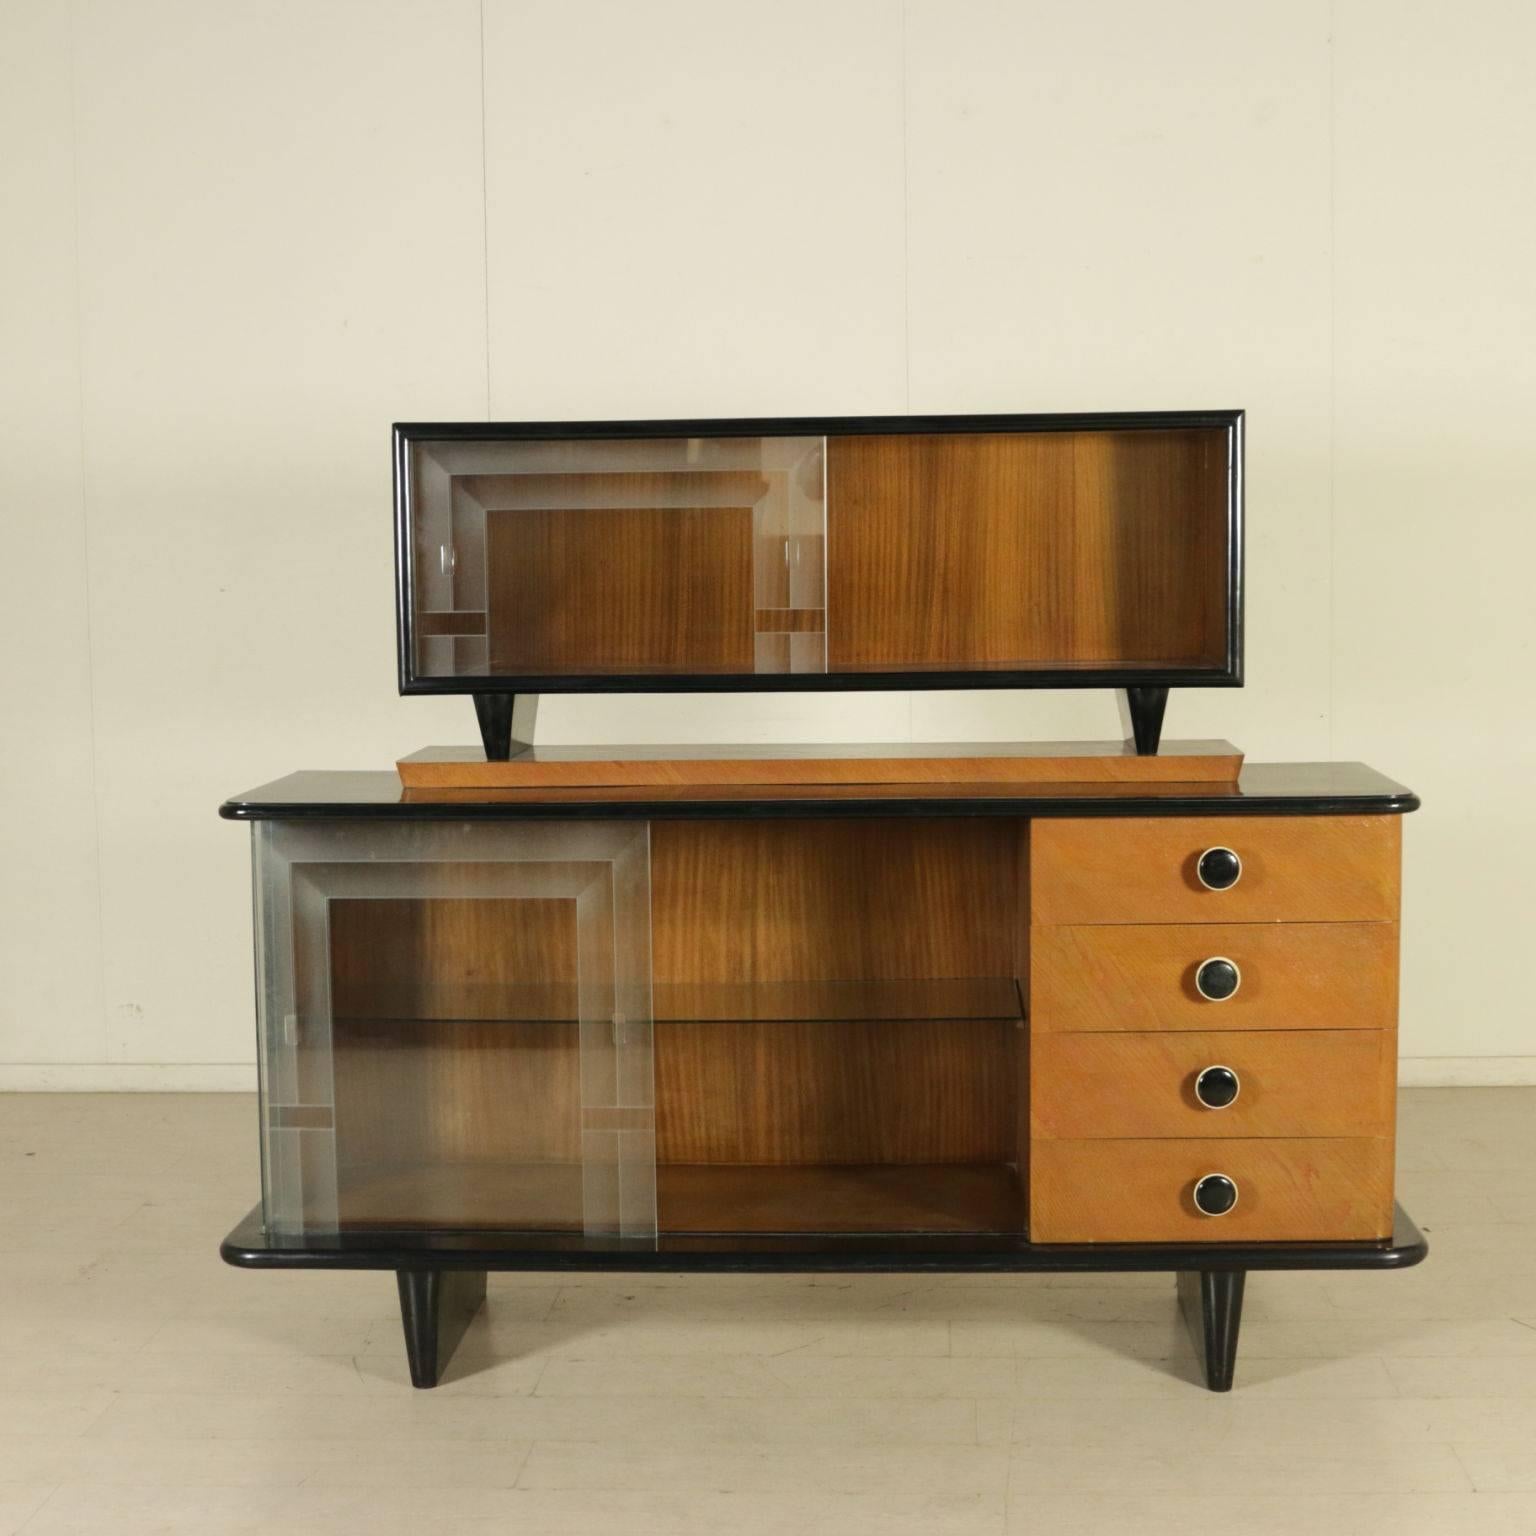 A sideboard with raised top and glass sliding doors. Ash veneer, ebony stained veneer. Manufactured in Italy, 1940s.